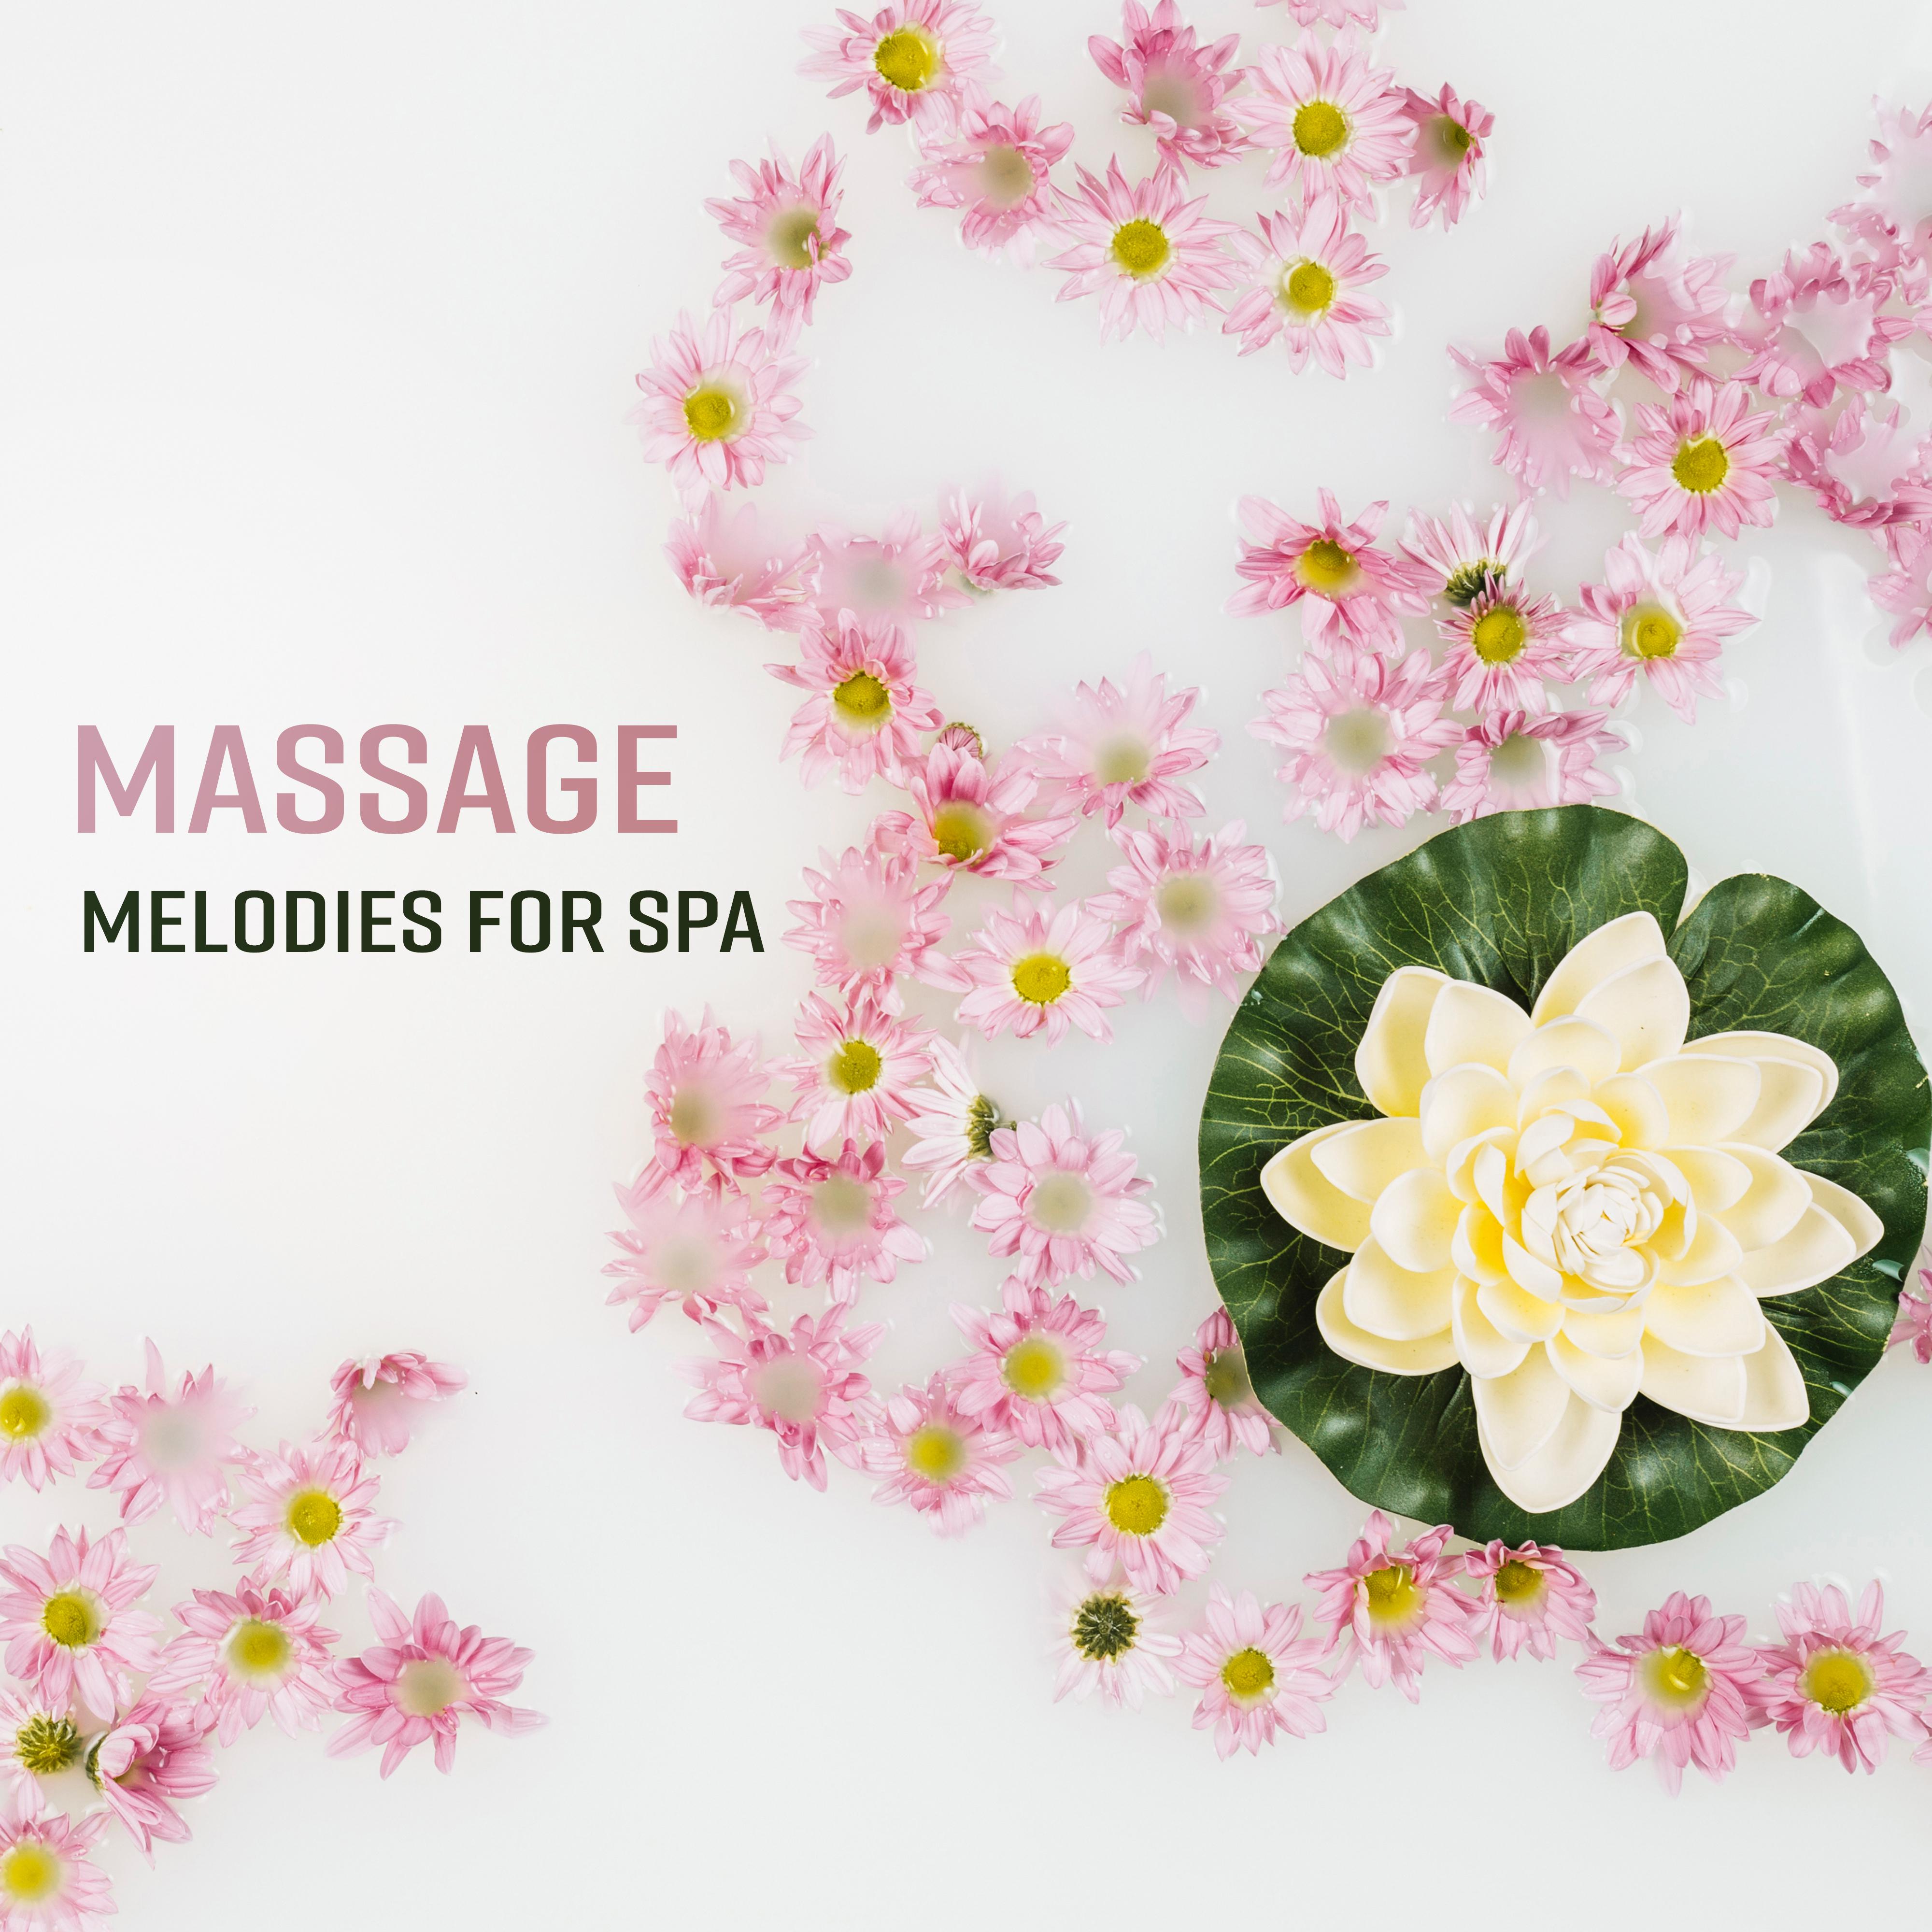 Massage Melodies for Spa